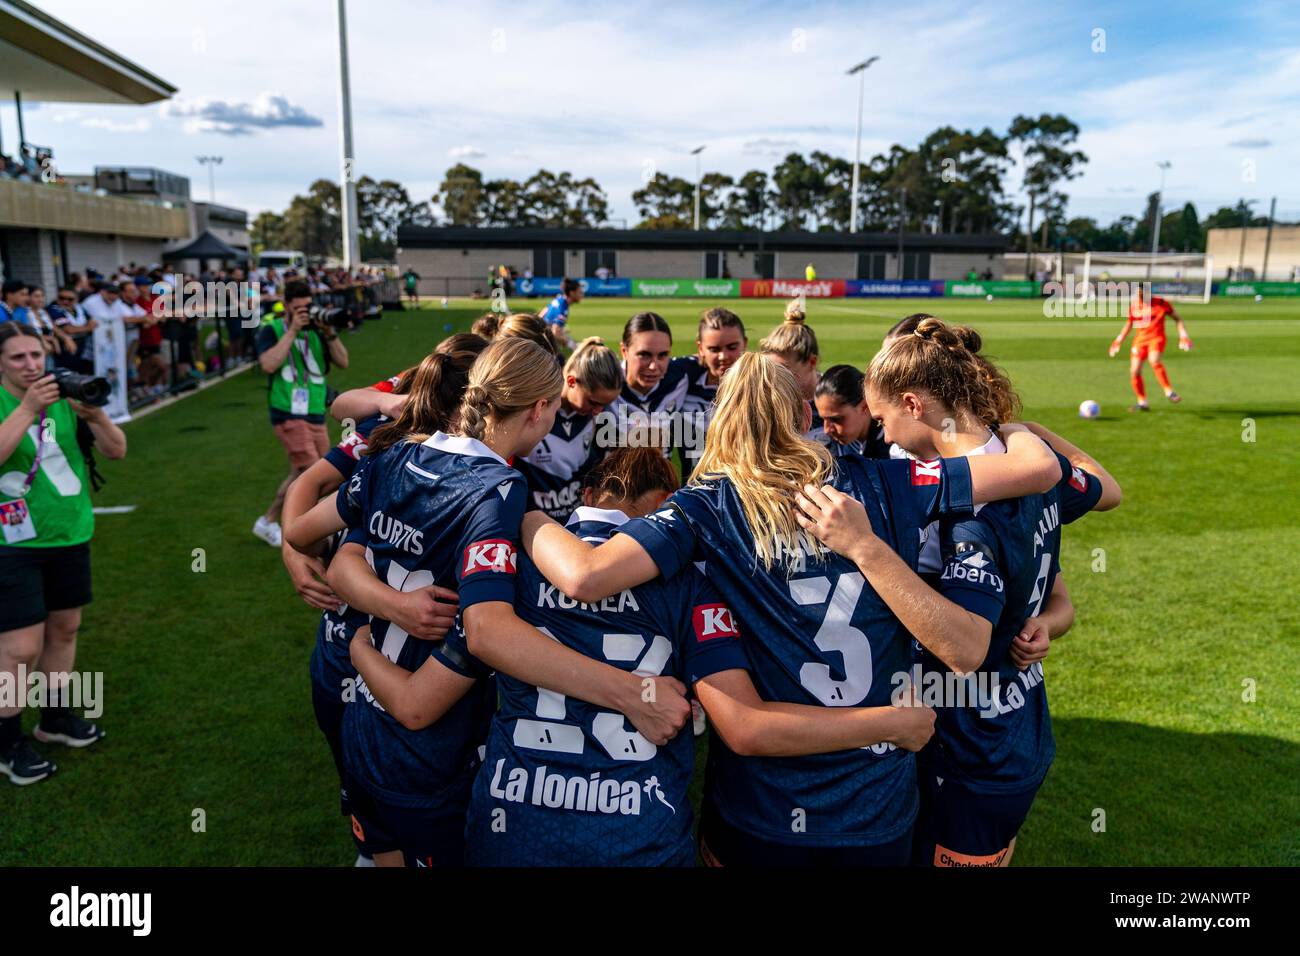 Bundoora, Australia. 6 January, 2024. Melbourne Victory FC team huddle prior to the start of the Isuzu UTE A-League match between Melbourne Victory FC and Western United FC at the Home of the Matildas in Bundoora, Australia. Credit: James Forrester/Alamy Live News Stock Photo